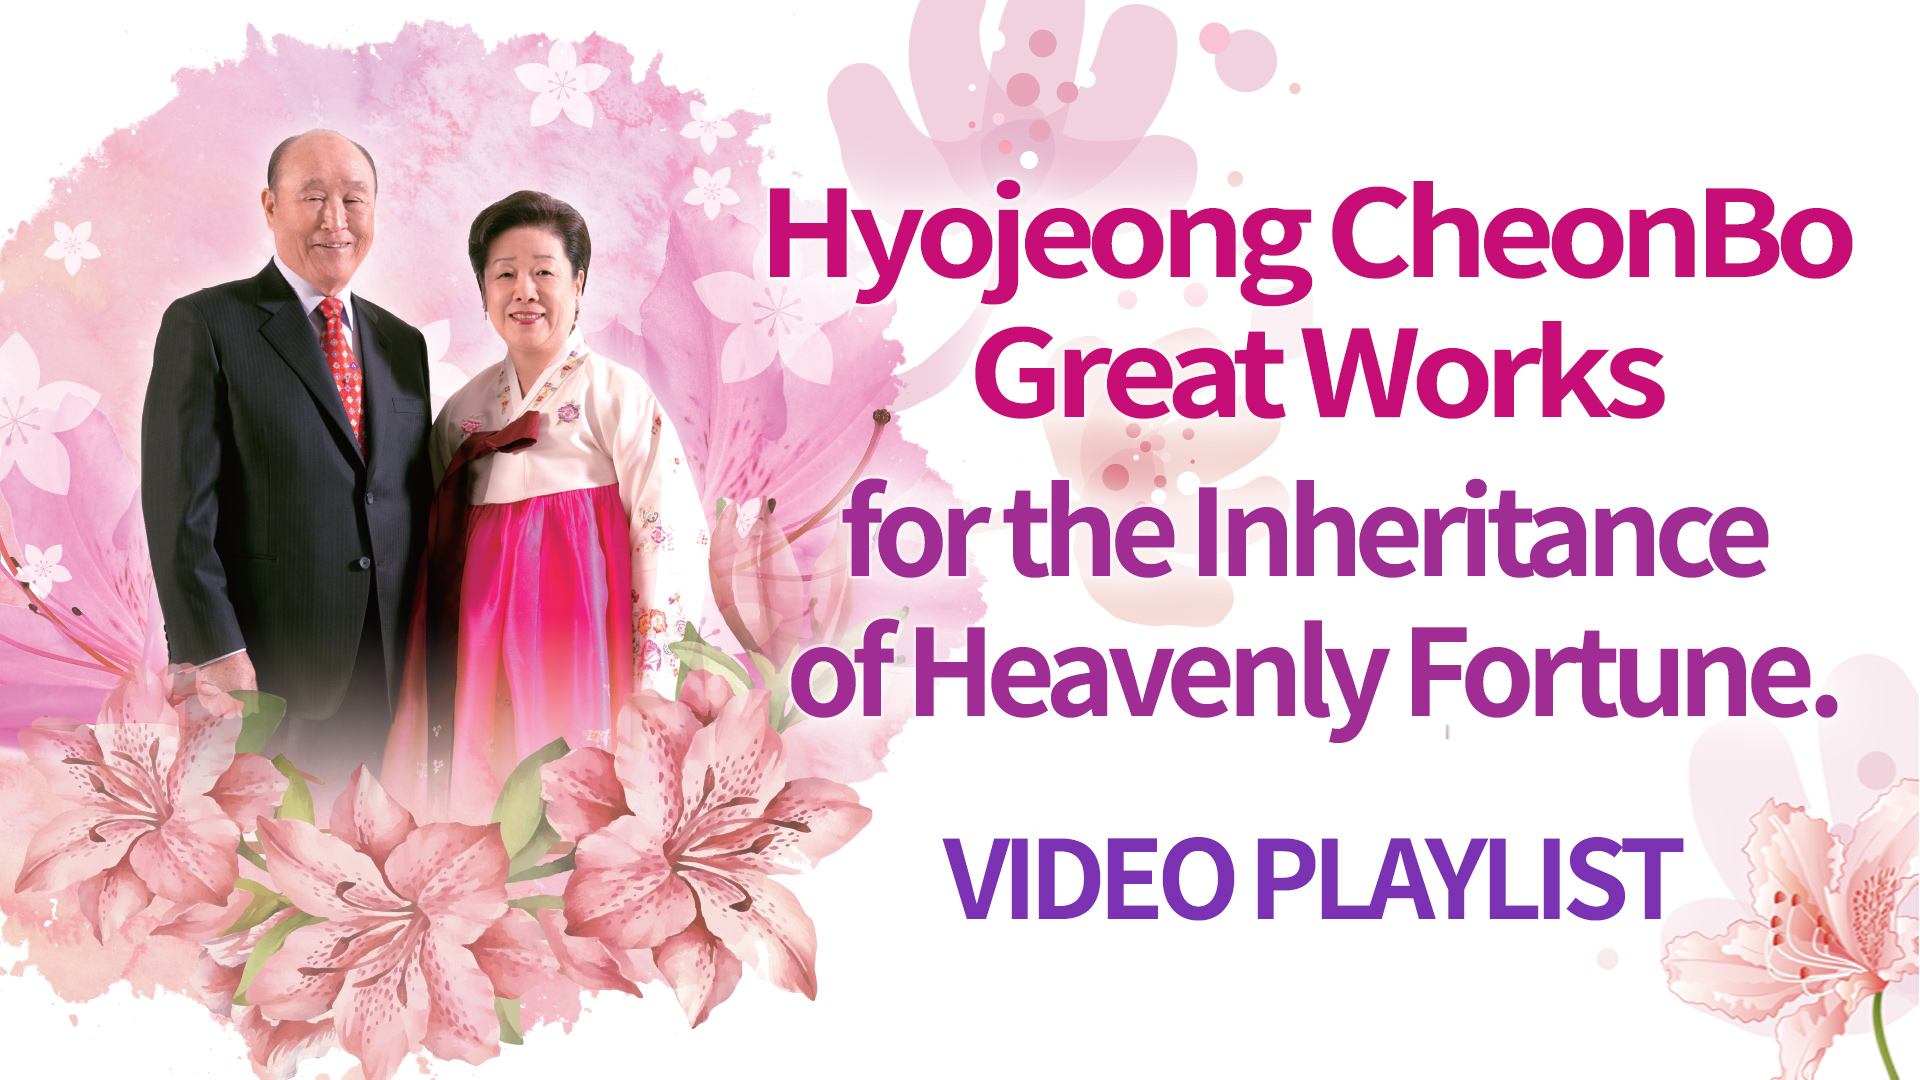 Hyojeong CheonBo Great Works for the Inheritance of Heavenly Fortune